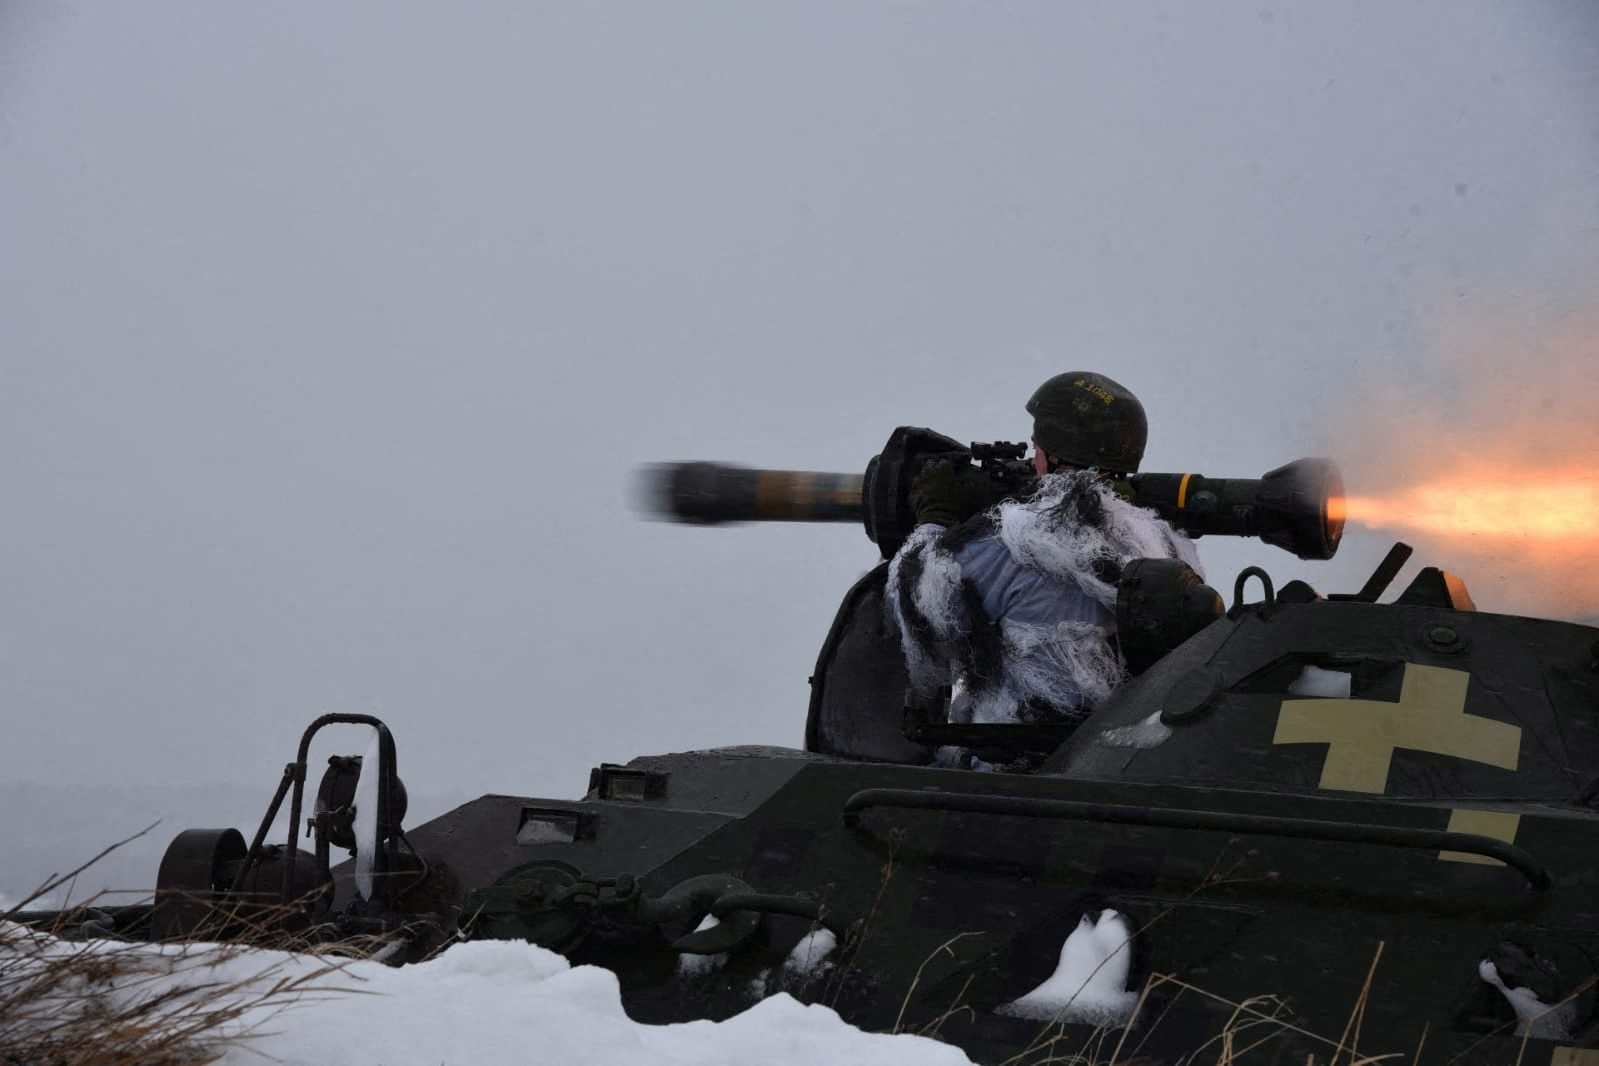 Ukrainian service members use NLAW missiles during drills in the Lviv region